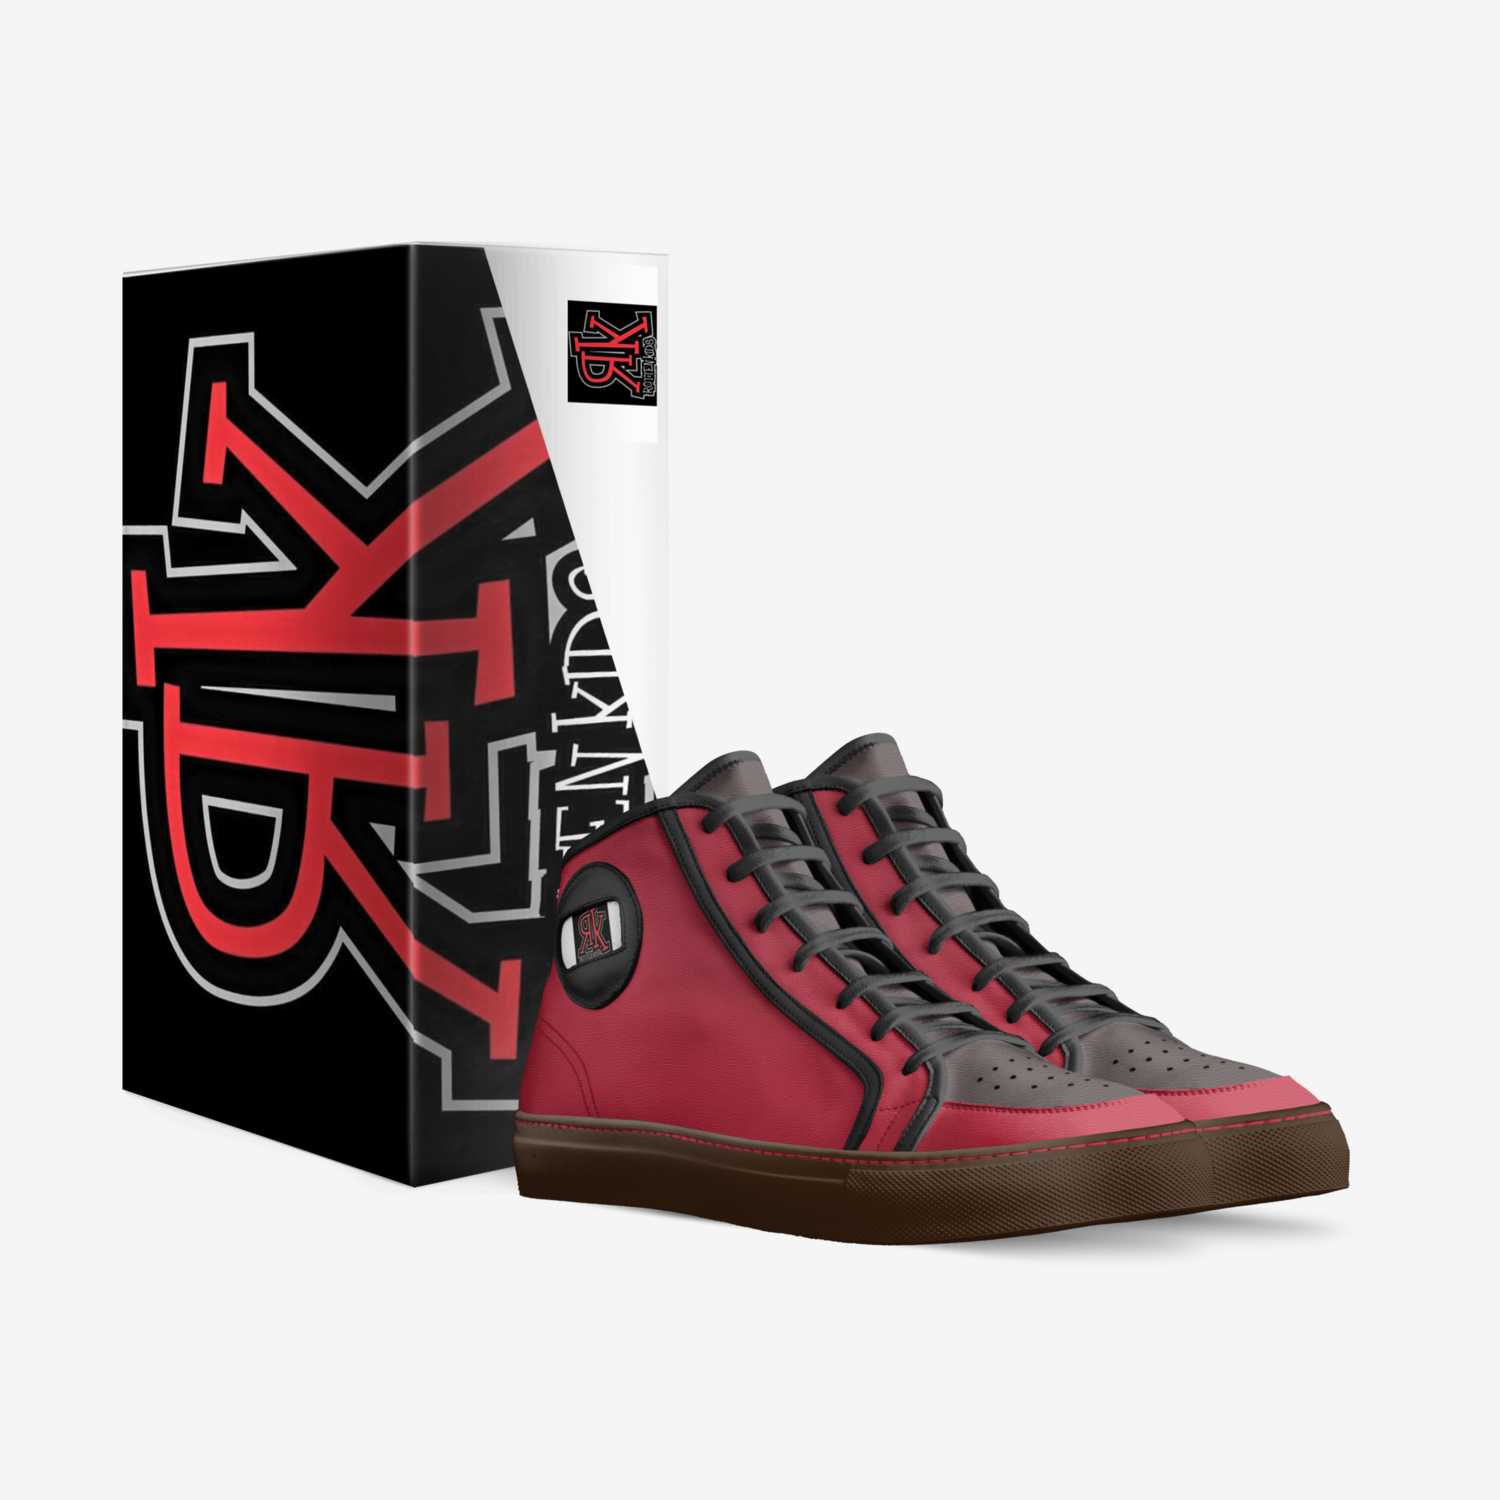 RK DEADPOOL custom made in Italy shoes by Michael Bane | Box view